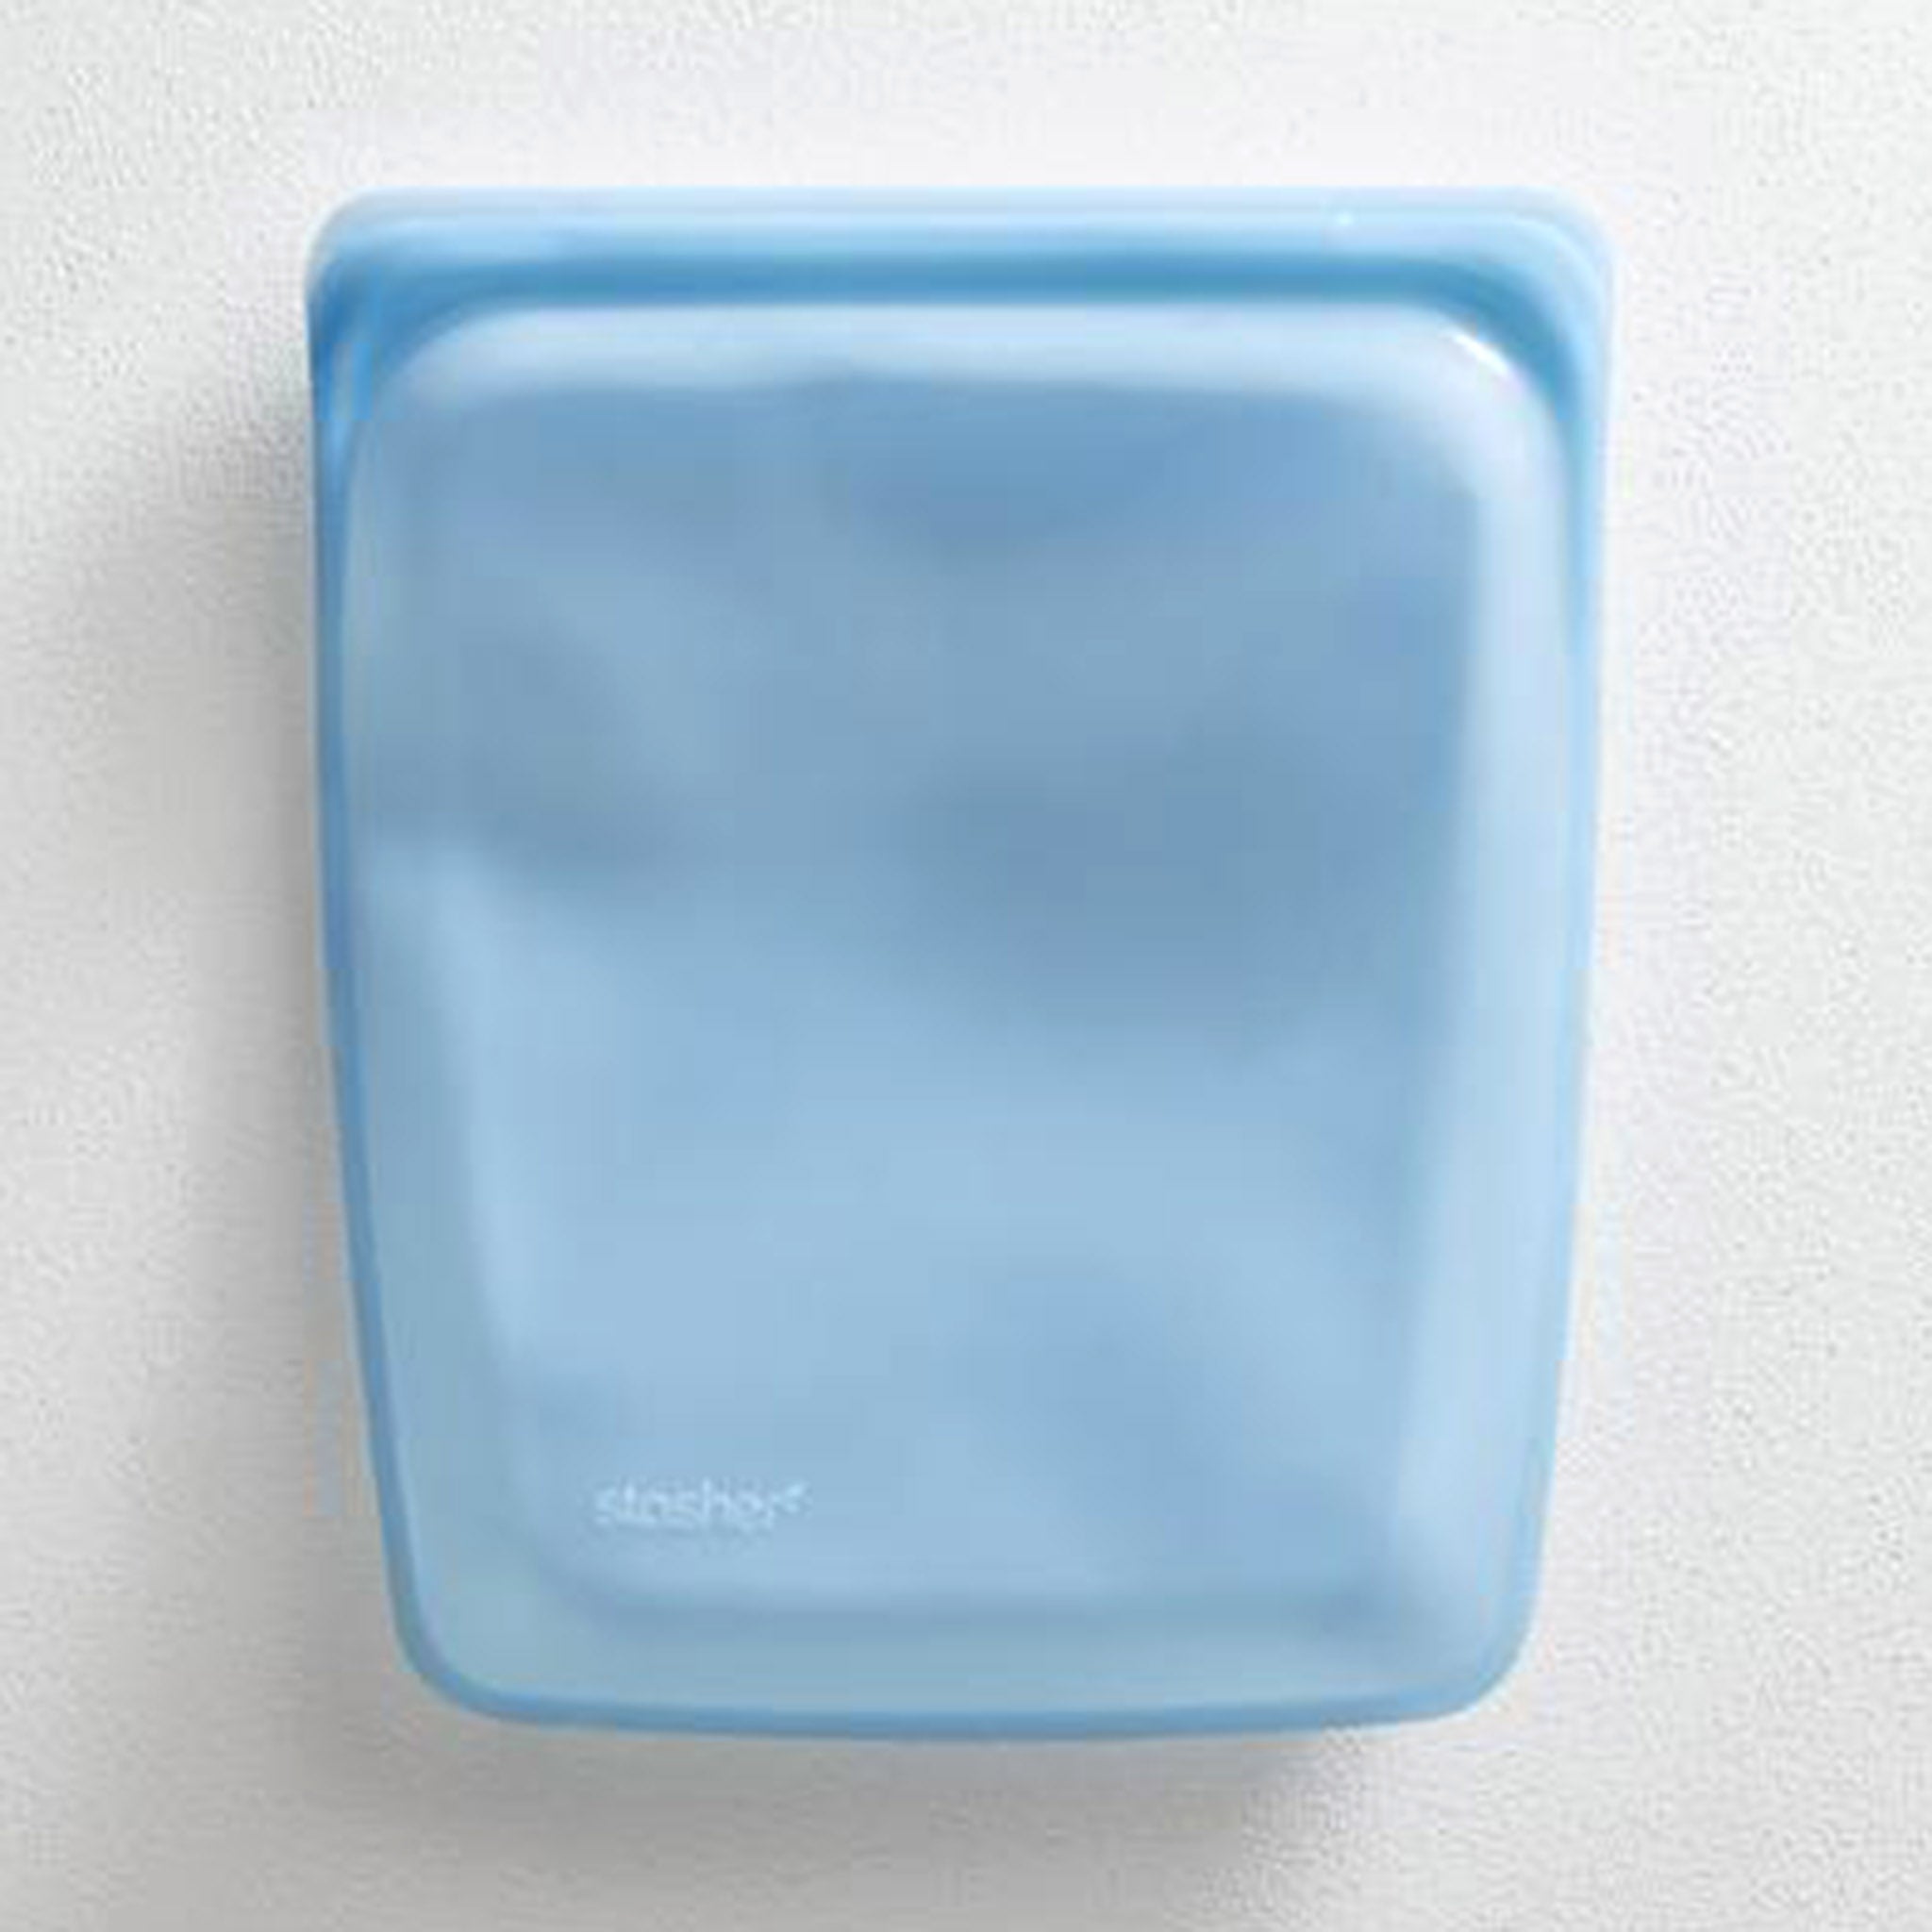 Stasher Quart Bag in Blue | Silicone